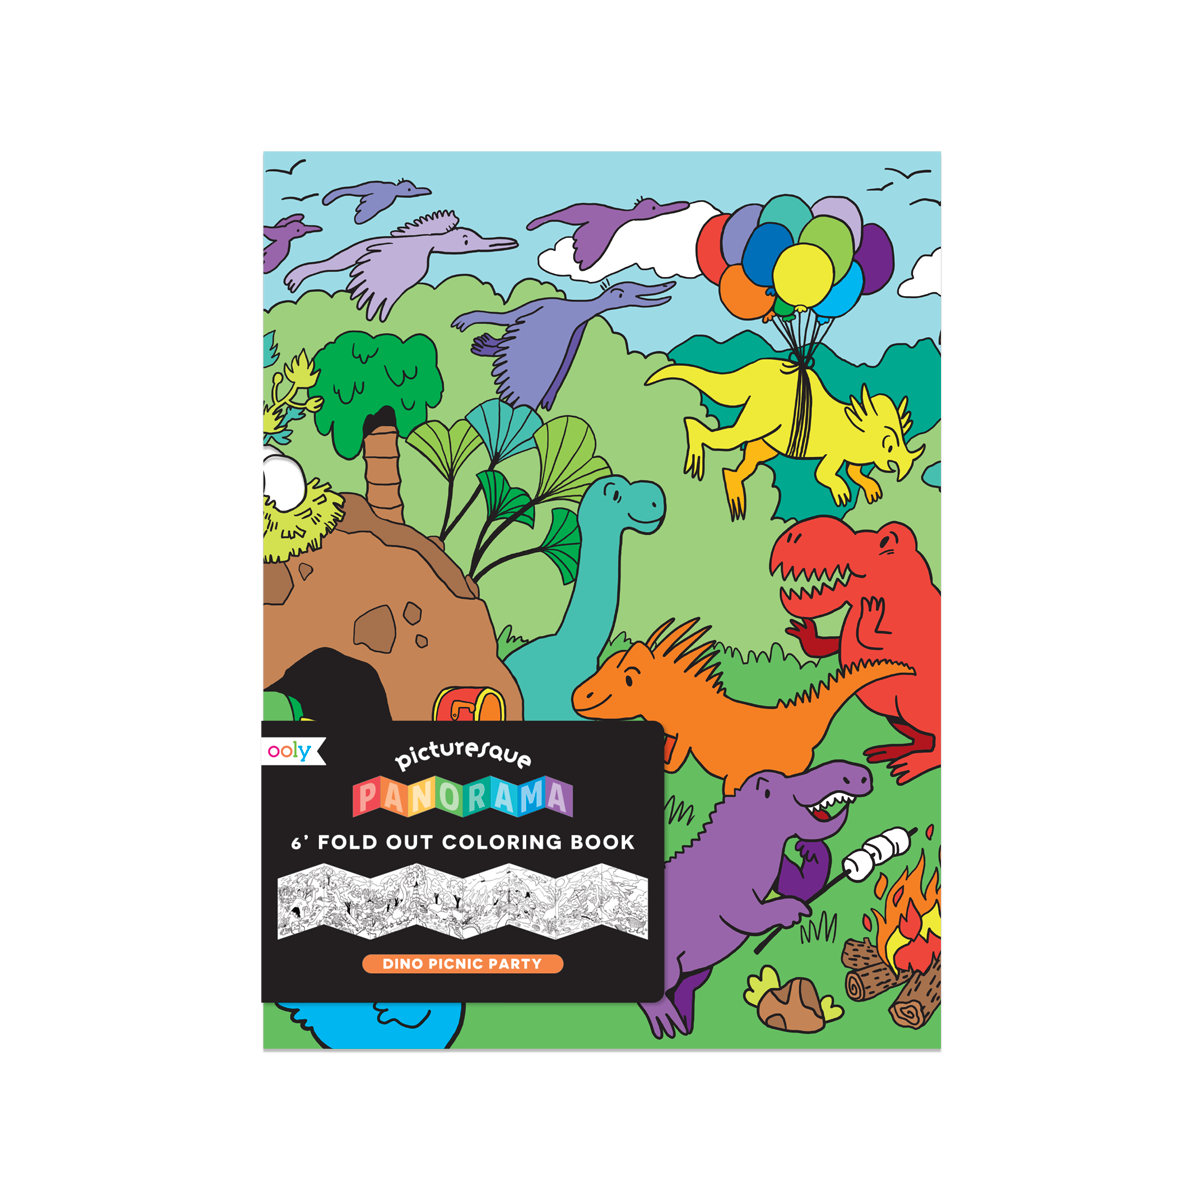 OOLY Picturesque Panorama Coloring Book - Dino Picnic Party Coloring Books